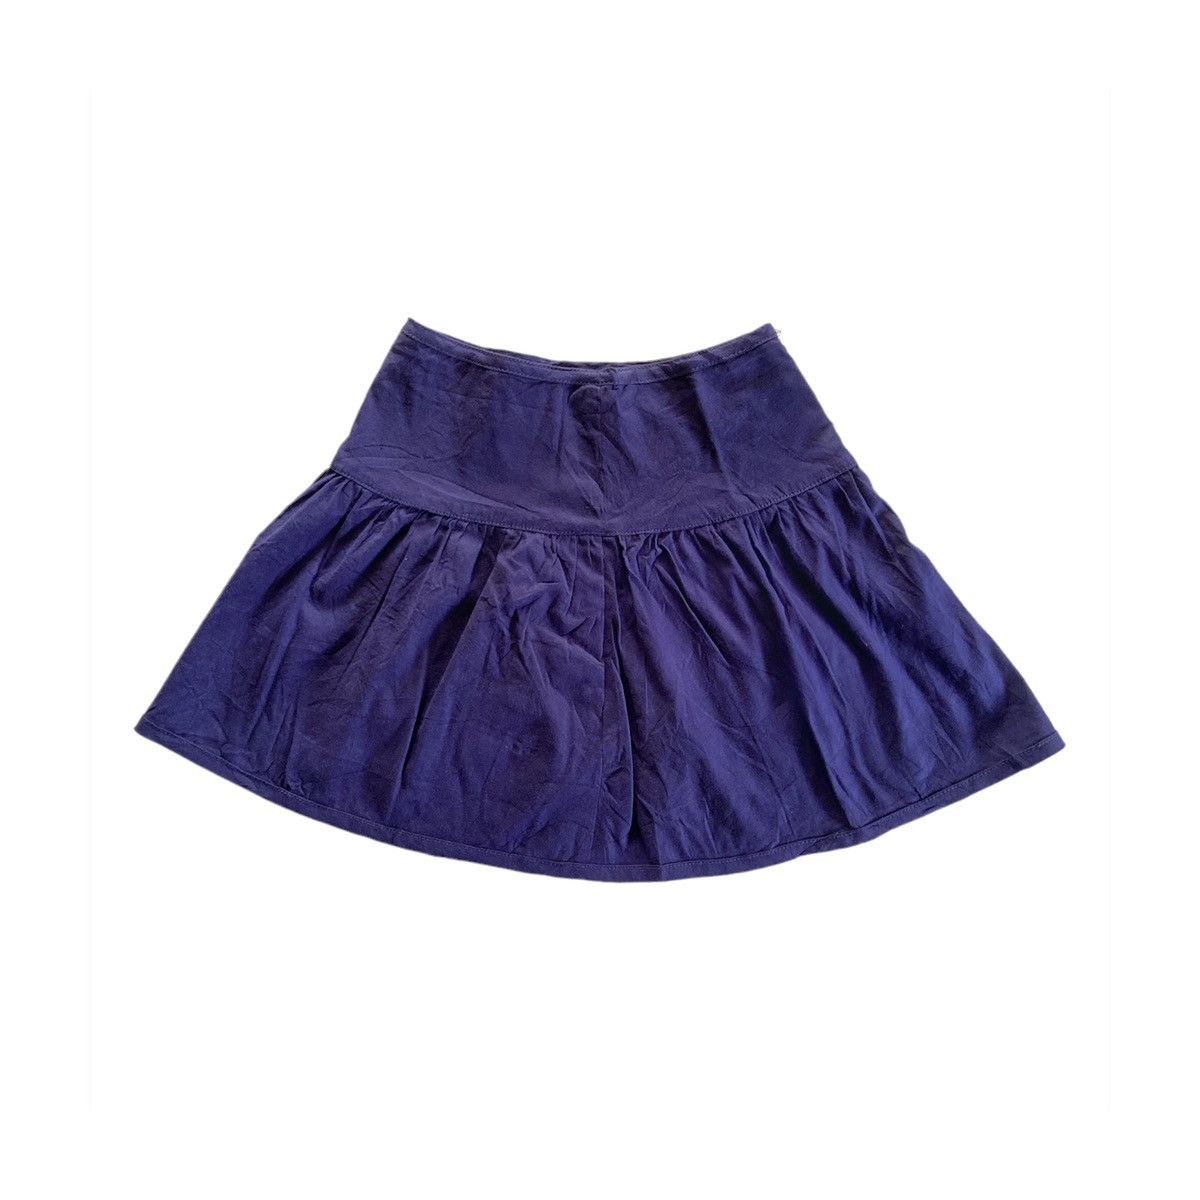 Marc by Marc Jacobs Mini Skirt - 2